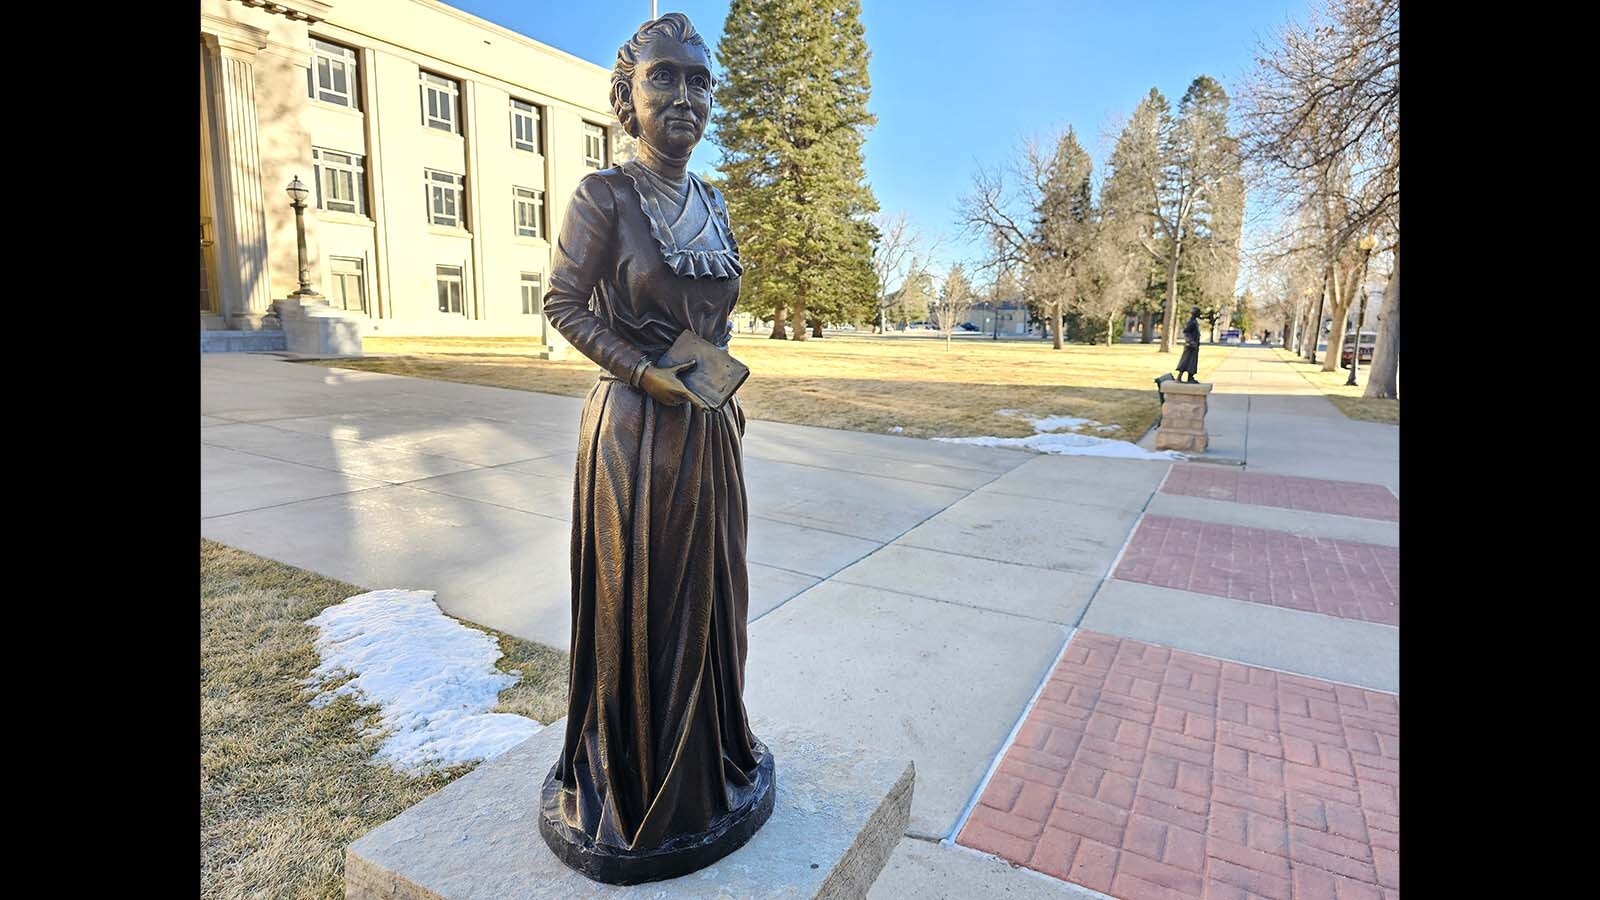 Esther Hobart Morris, Wyoming’s first female justice of the peace, immortalized by sculptor Joel Turner, stands just outside the Wyoming Supreme Court building. Donor was Jim Collins.